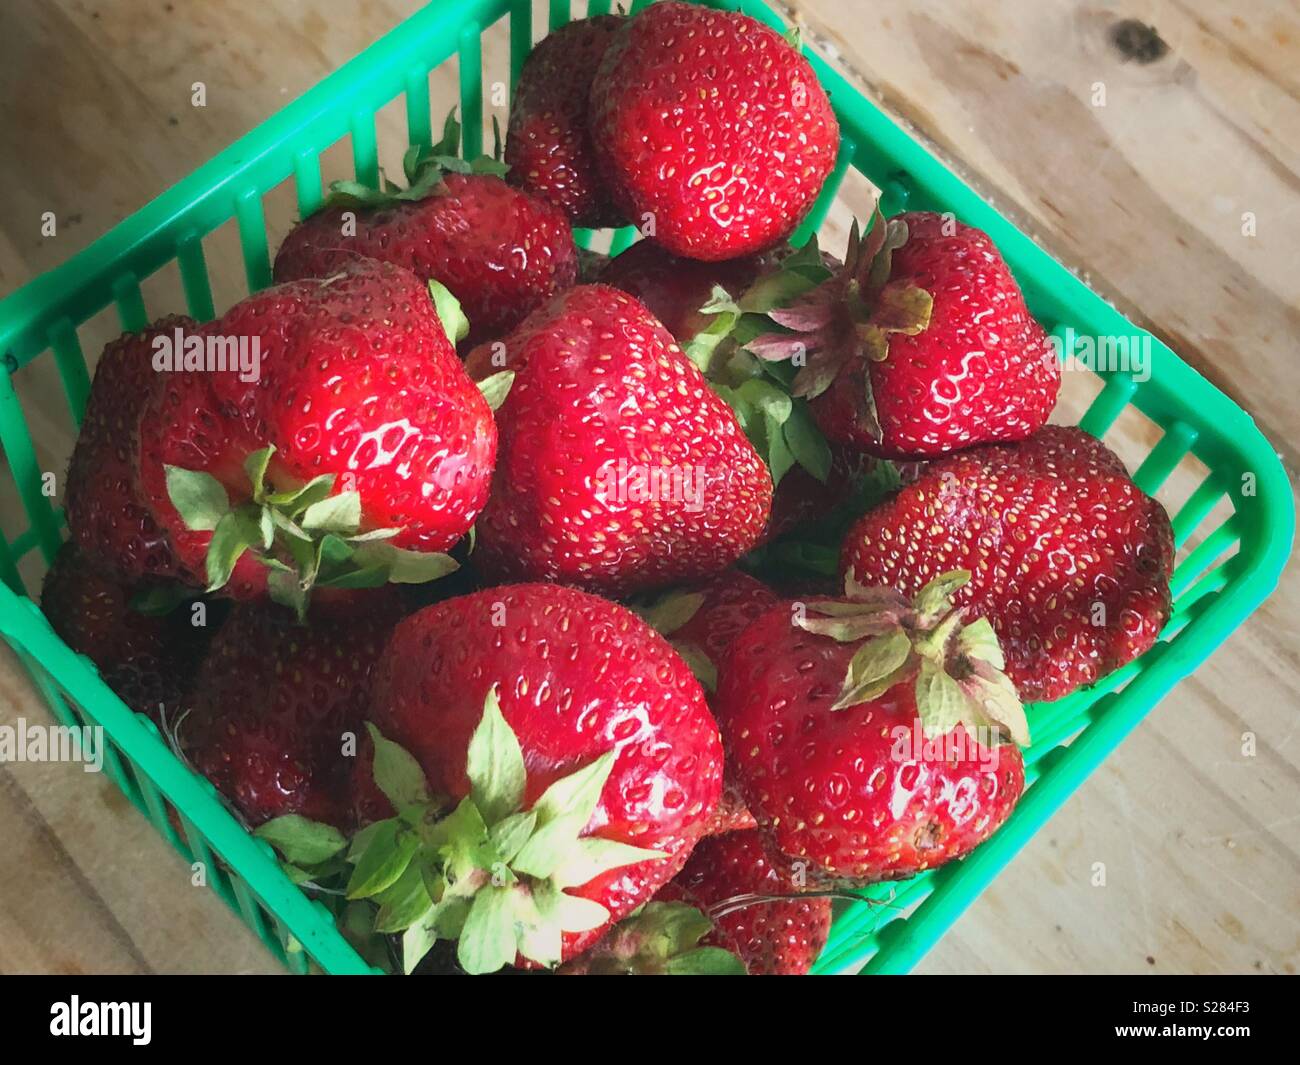 Quart of fresh picked Ontario strawberries on a wooden table Stock Photo